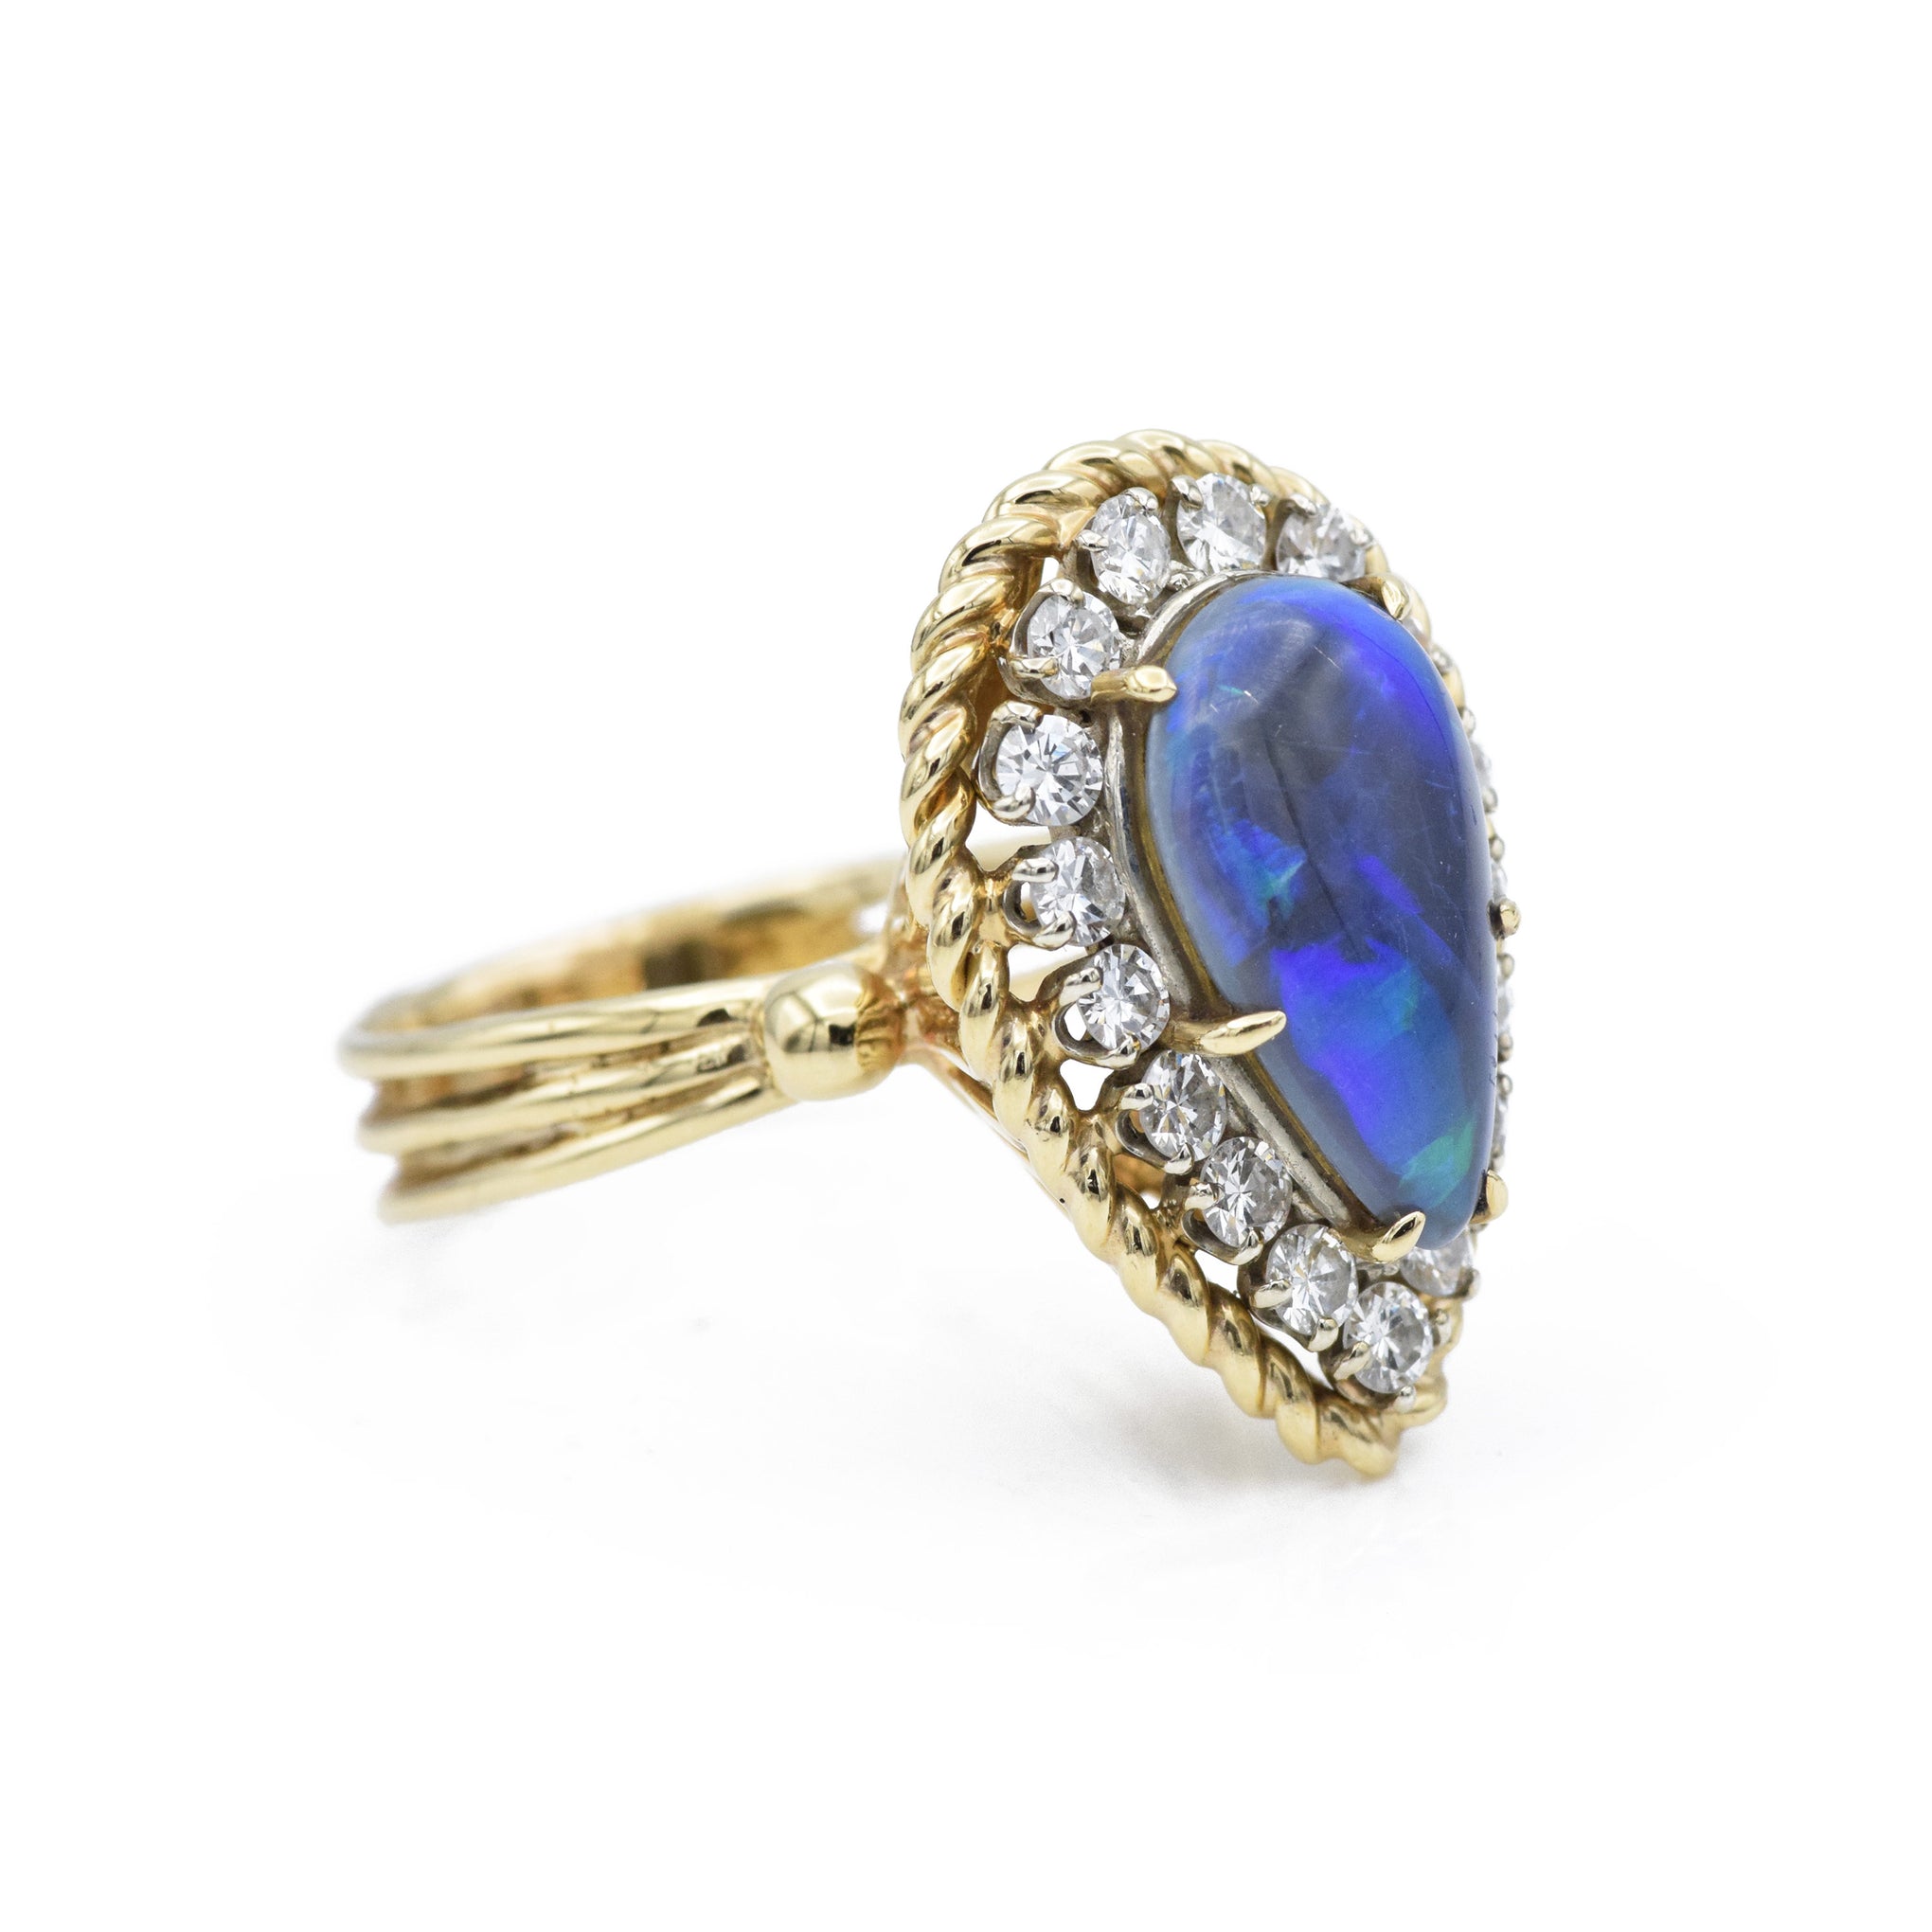 Vintage Gold & Pear Shaped Boulder Black Opal Ring with Diamonds